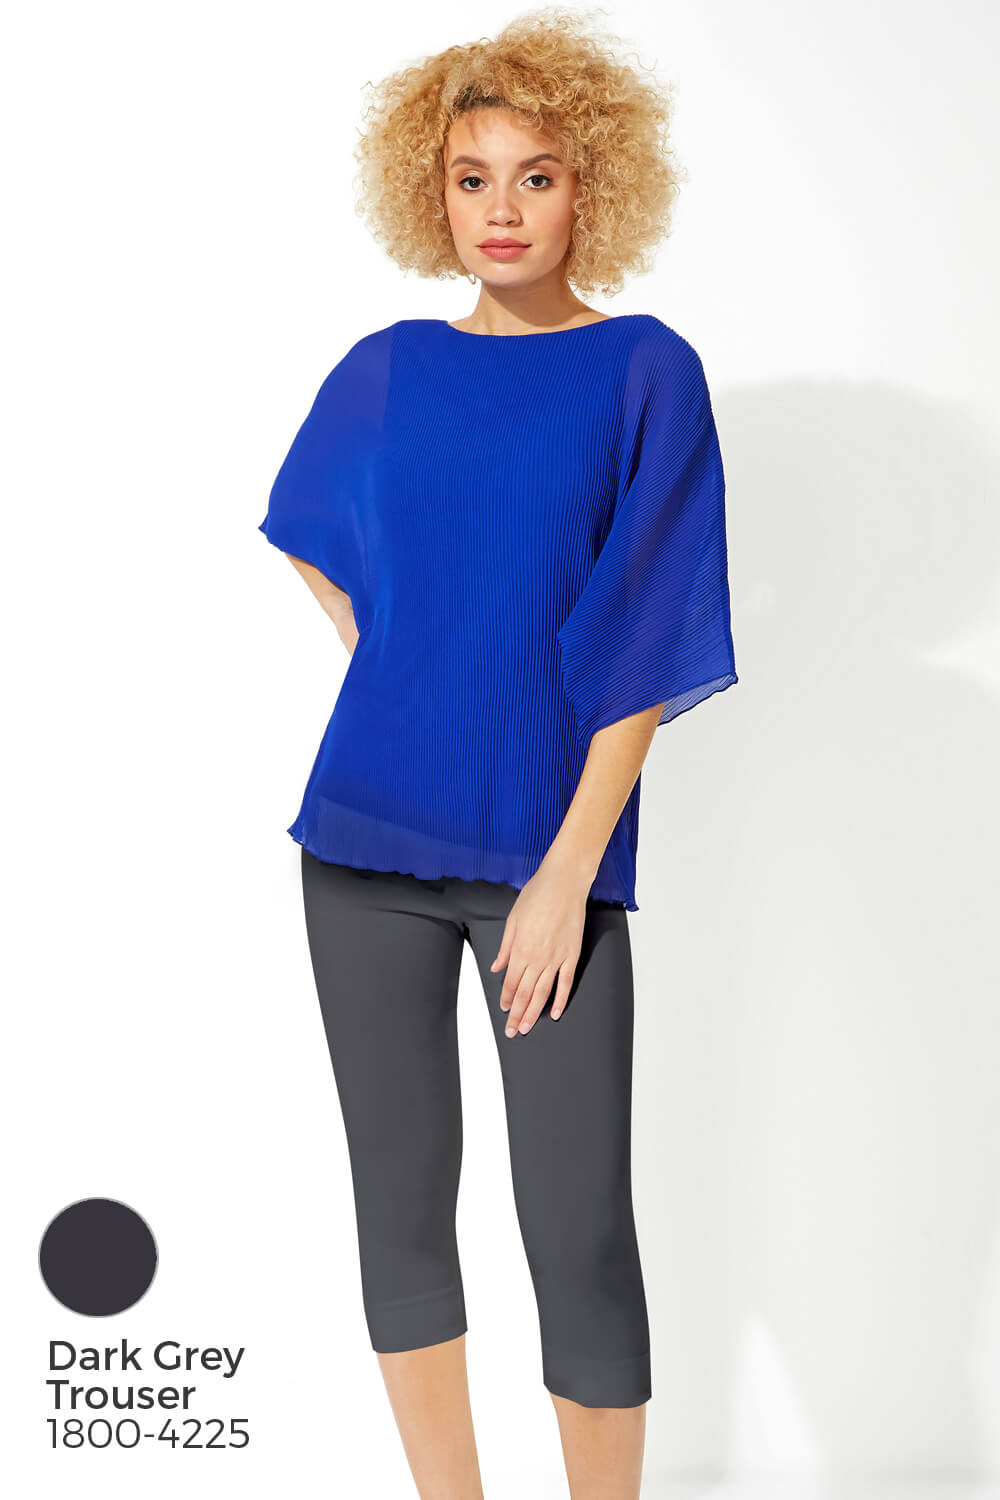 Royal Blue Pleated Chiffon Overlay Top, Image 6 of 8